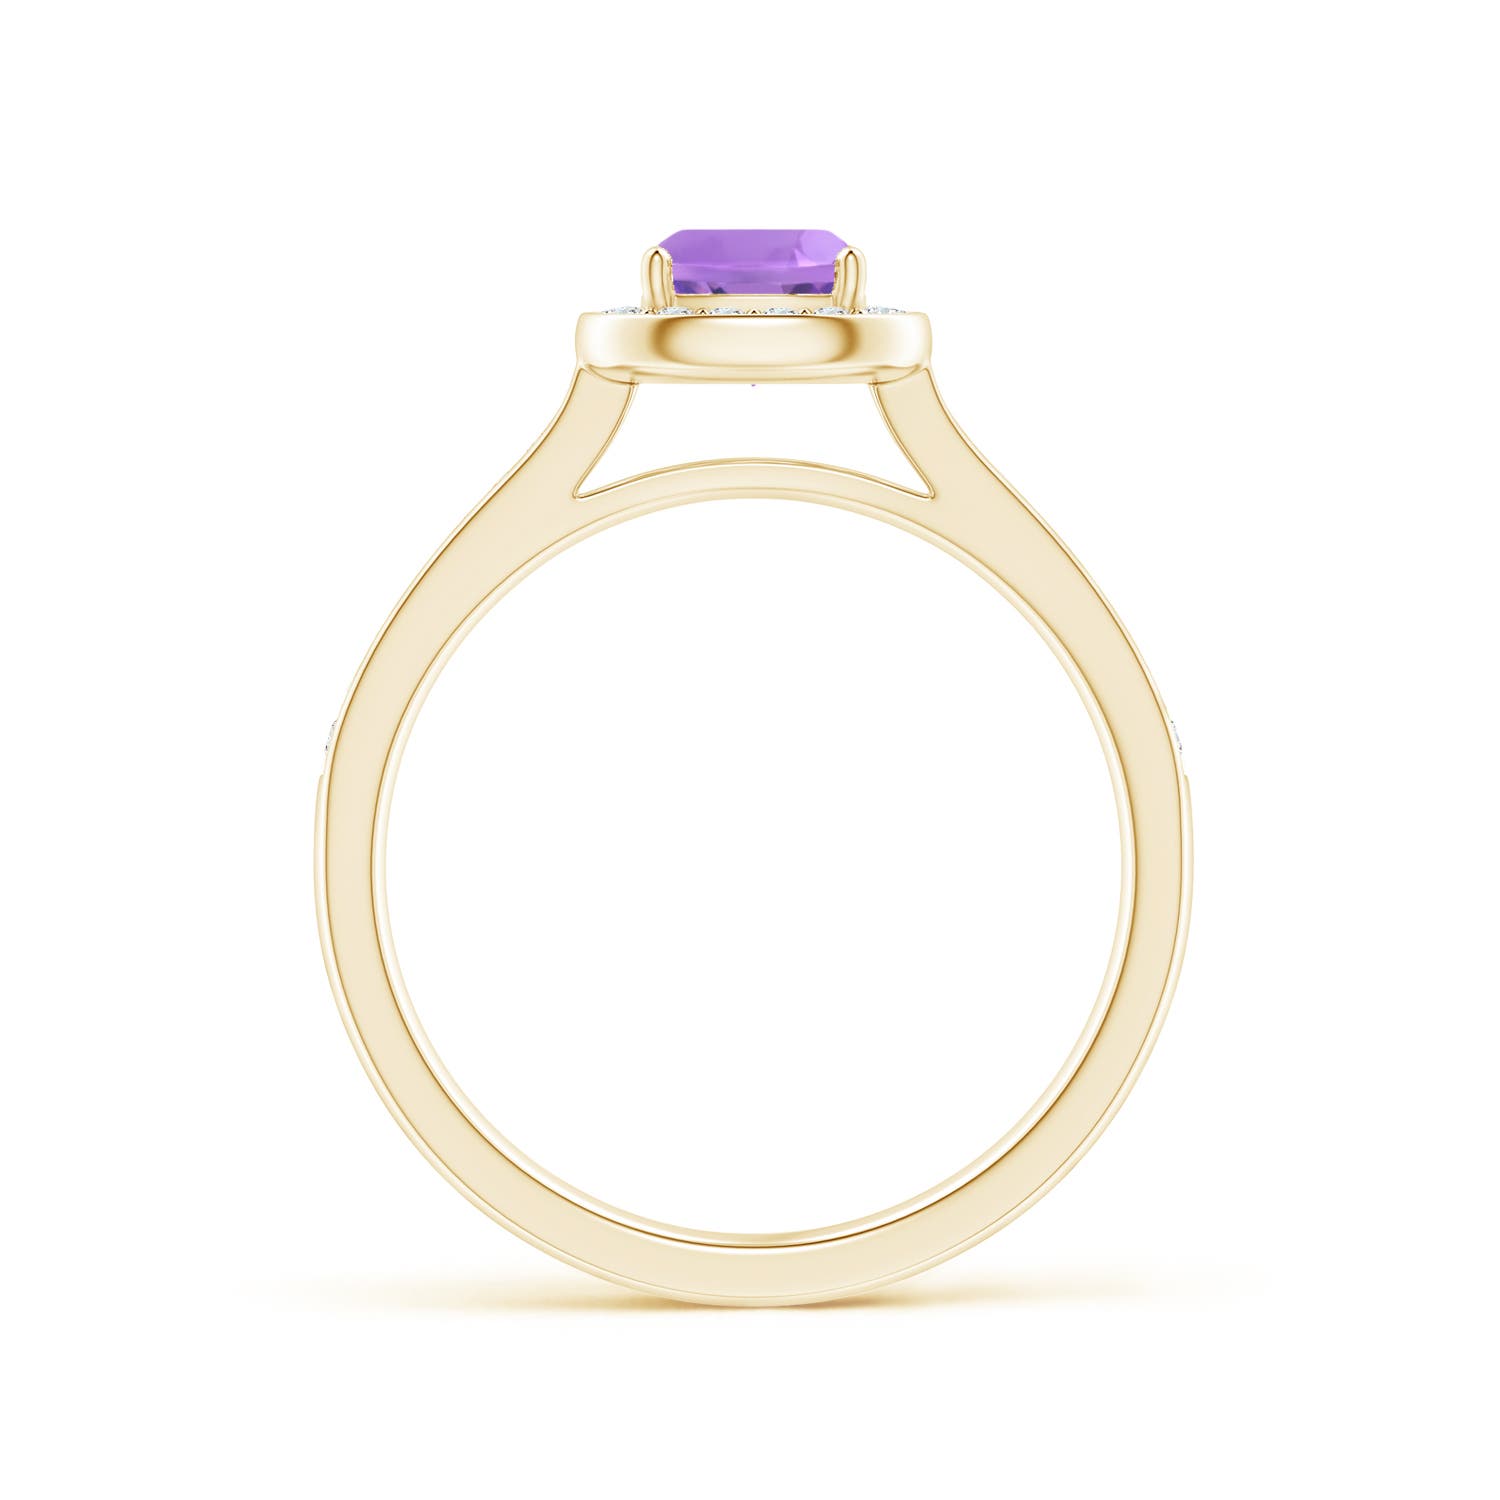 A - Amethyst / 0.81 CT / 14 KT Yellow Gold